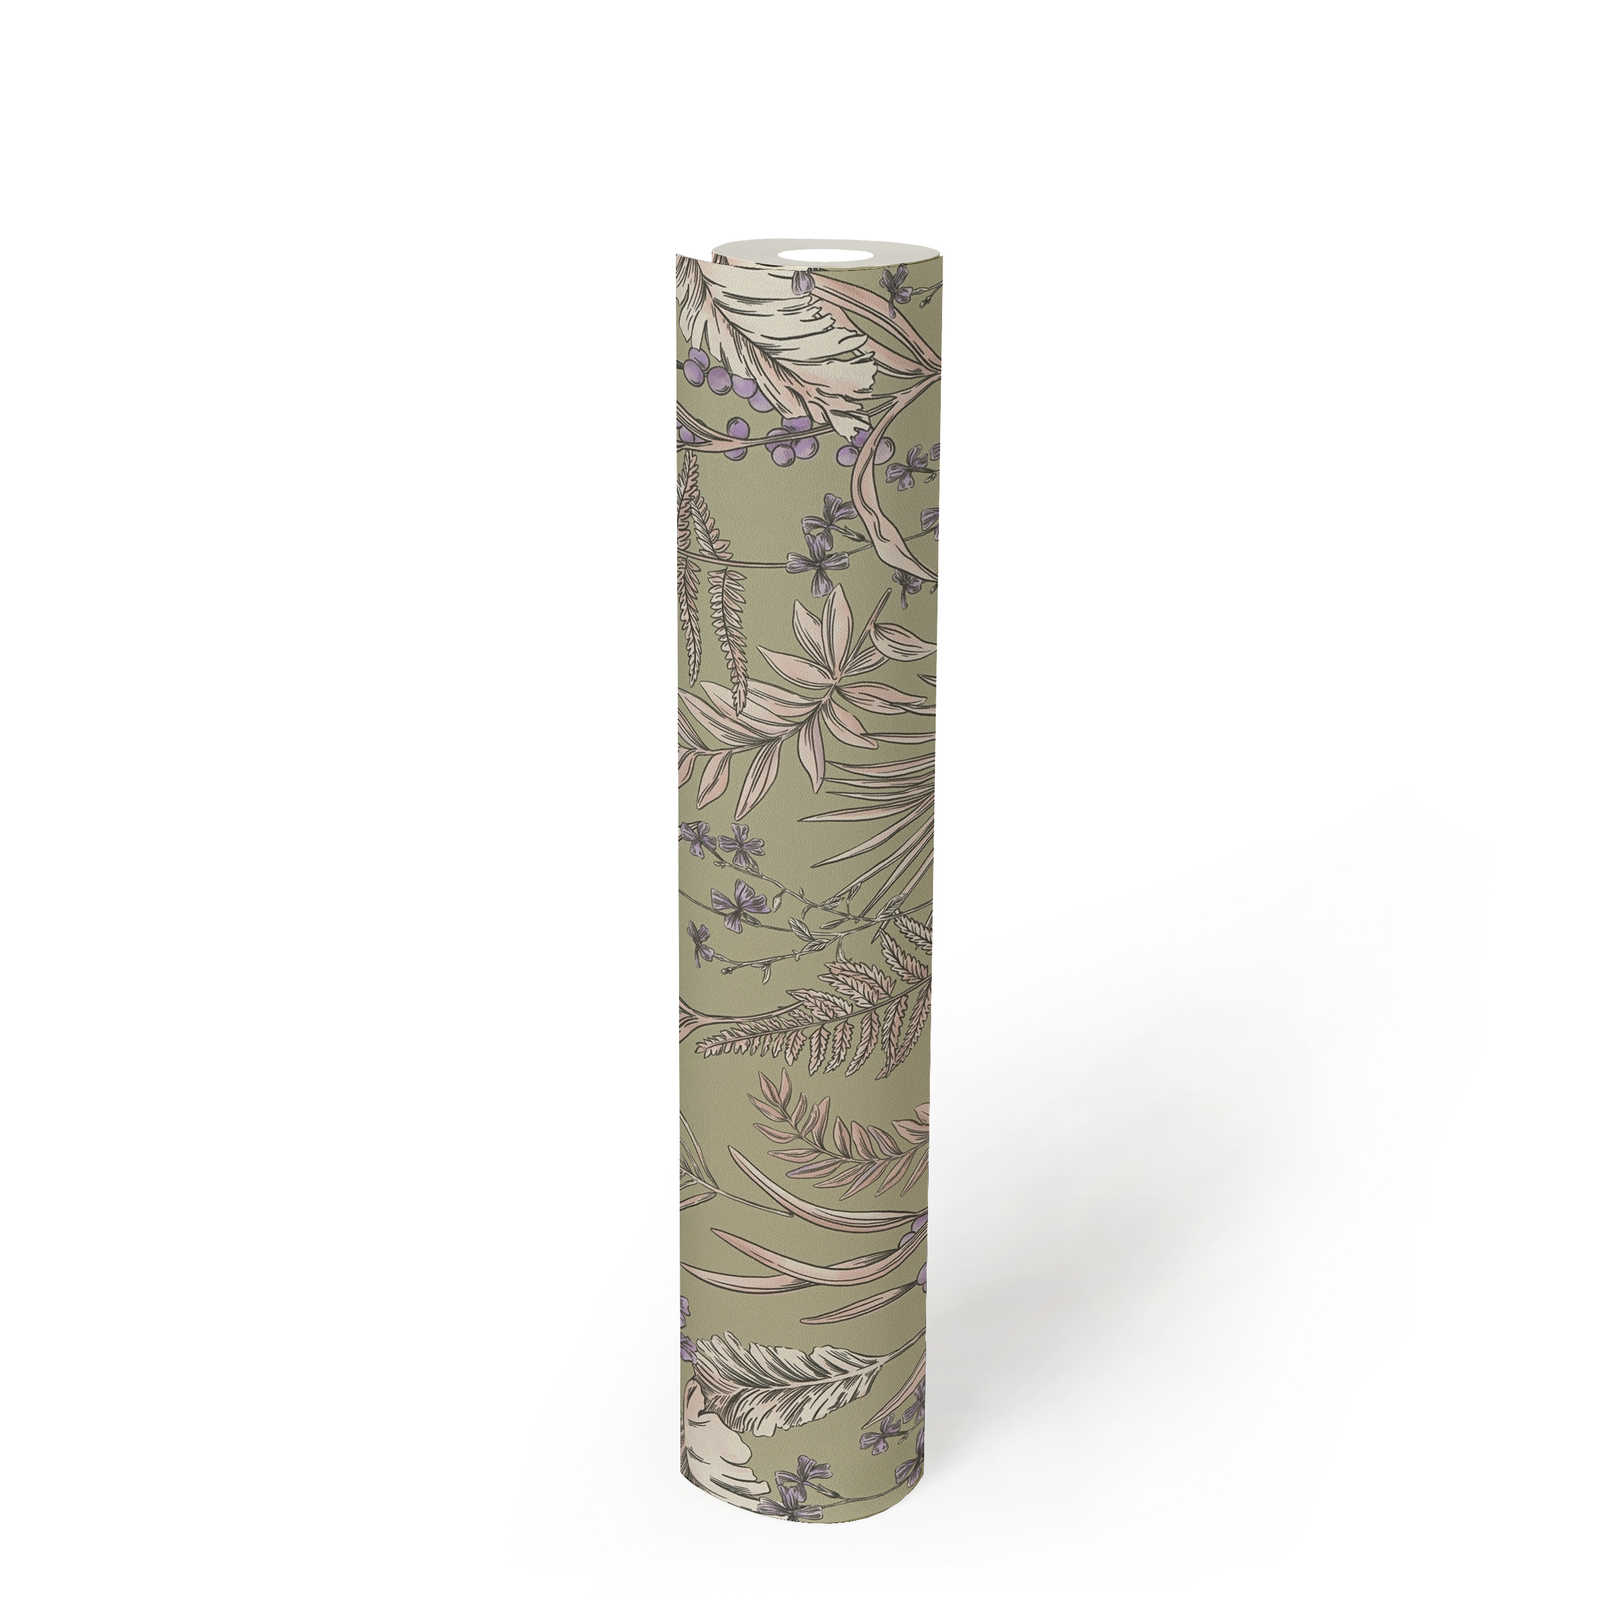             Modern floral style wallpaper with leaves & flowers textured - grey, cream, purple
        